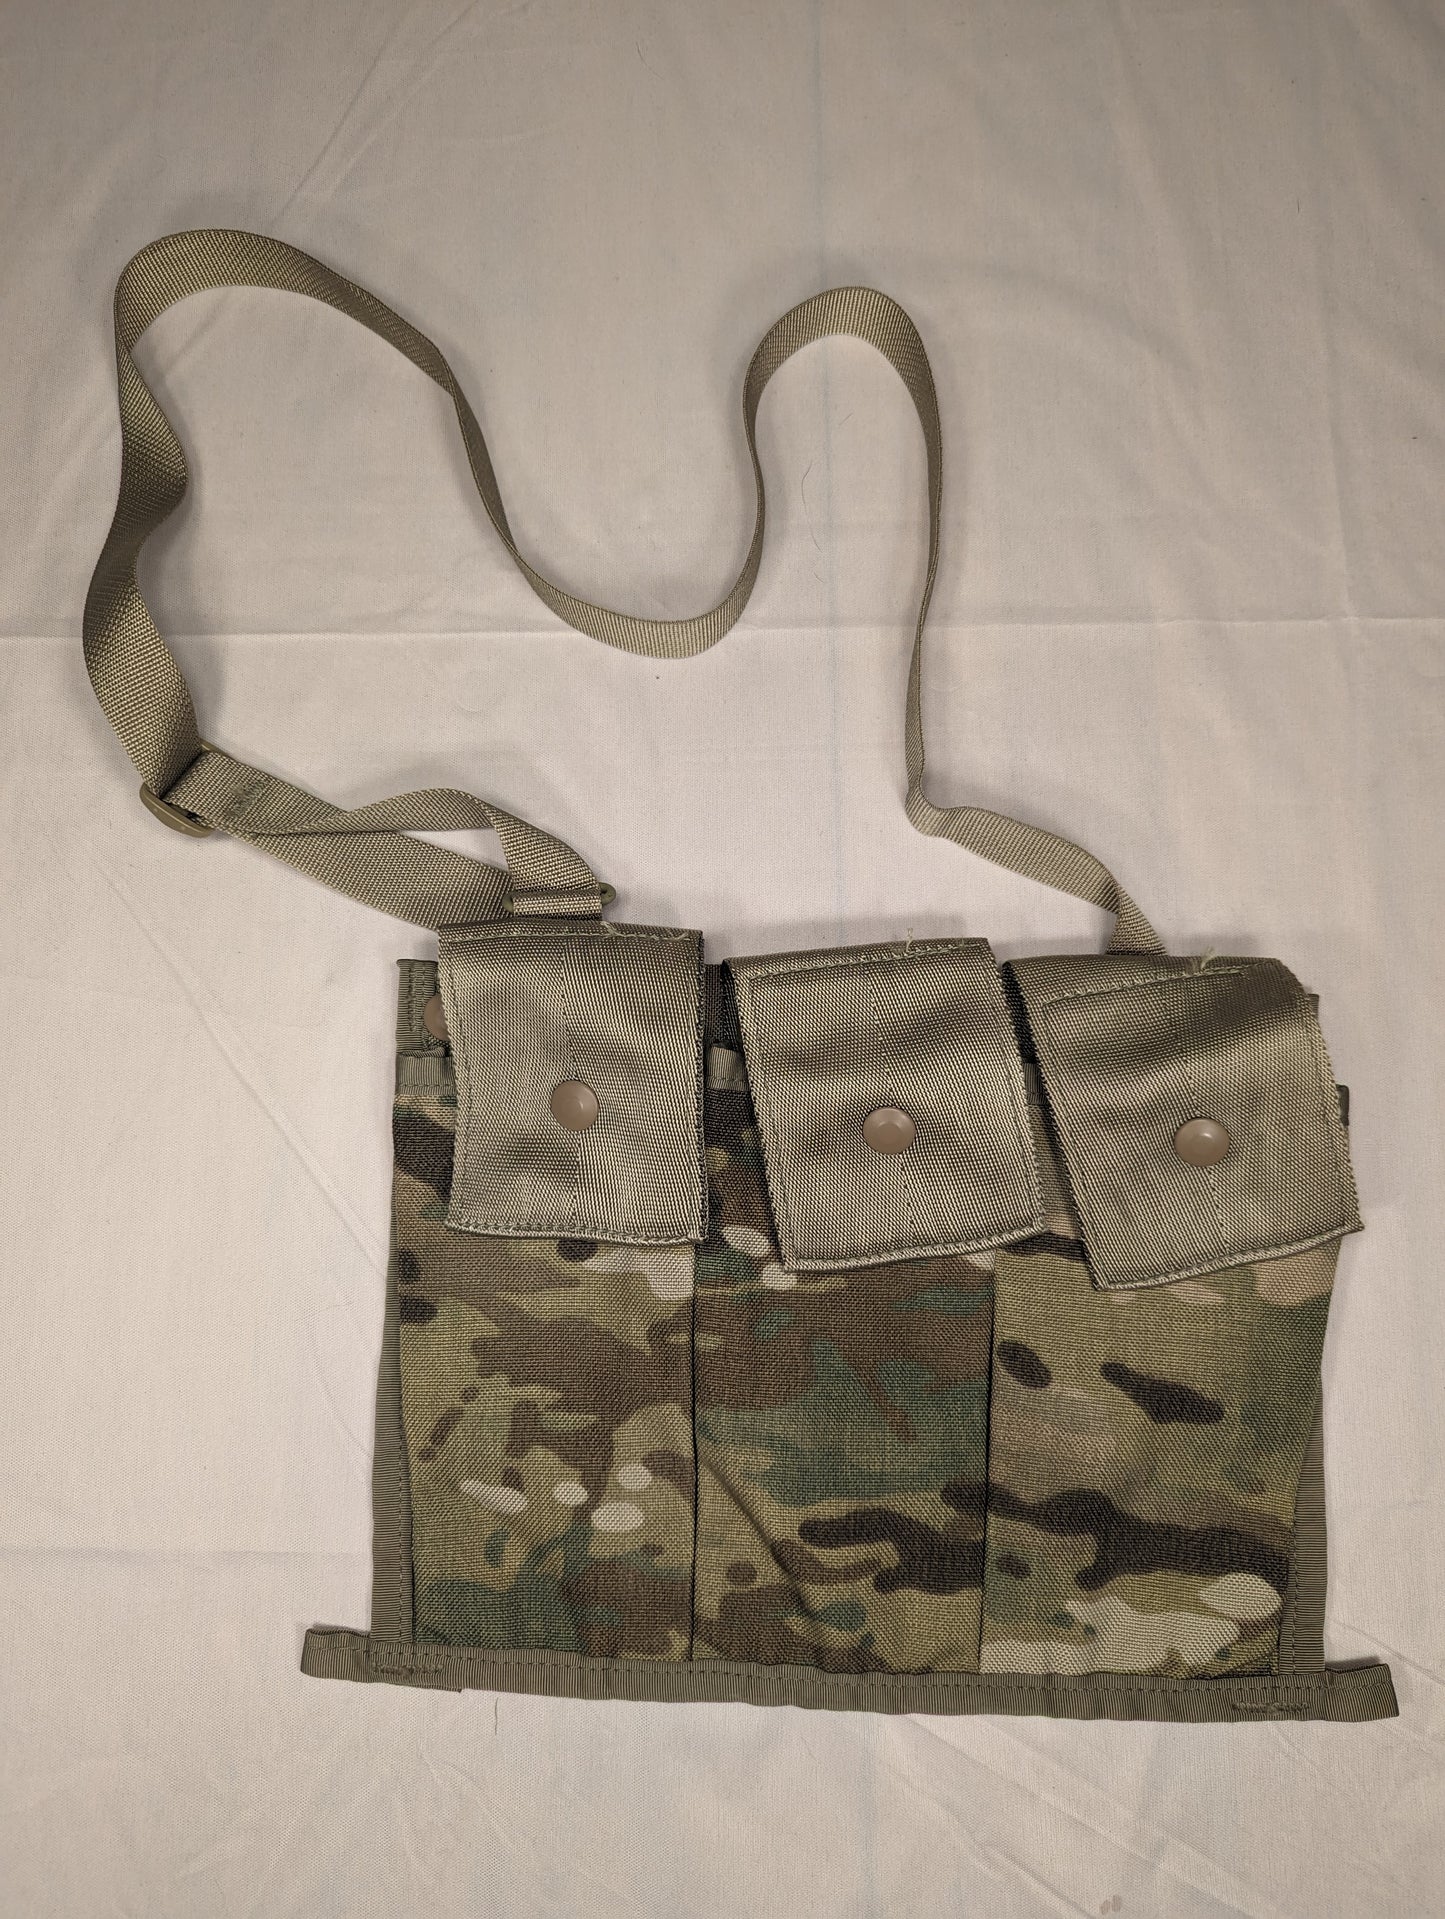 3-Day Mission Pack - OCP